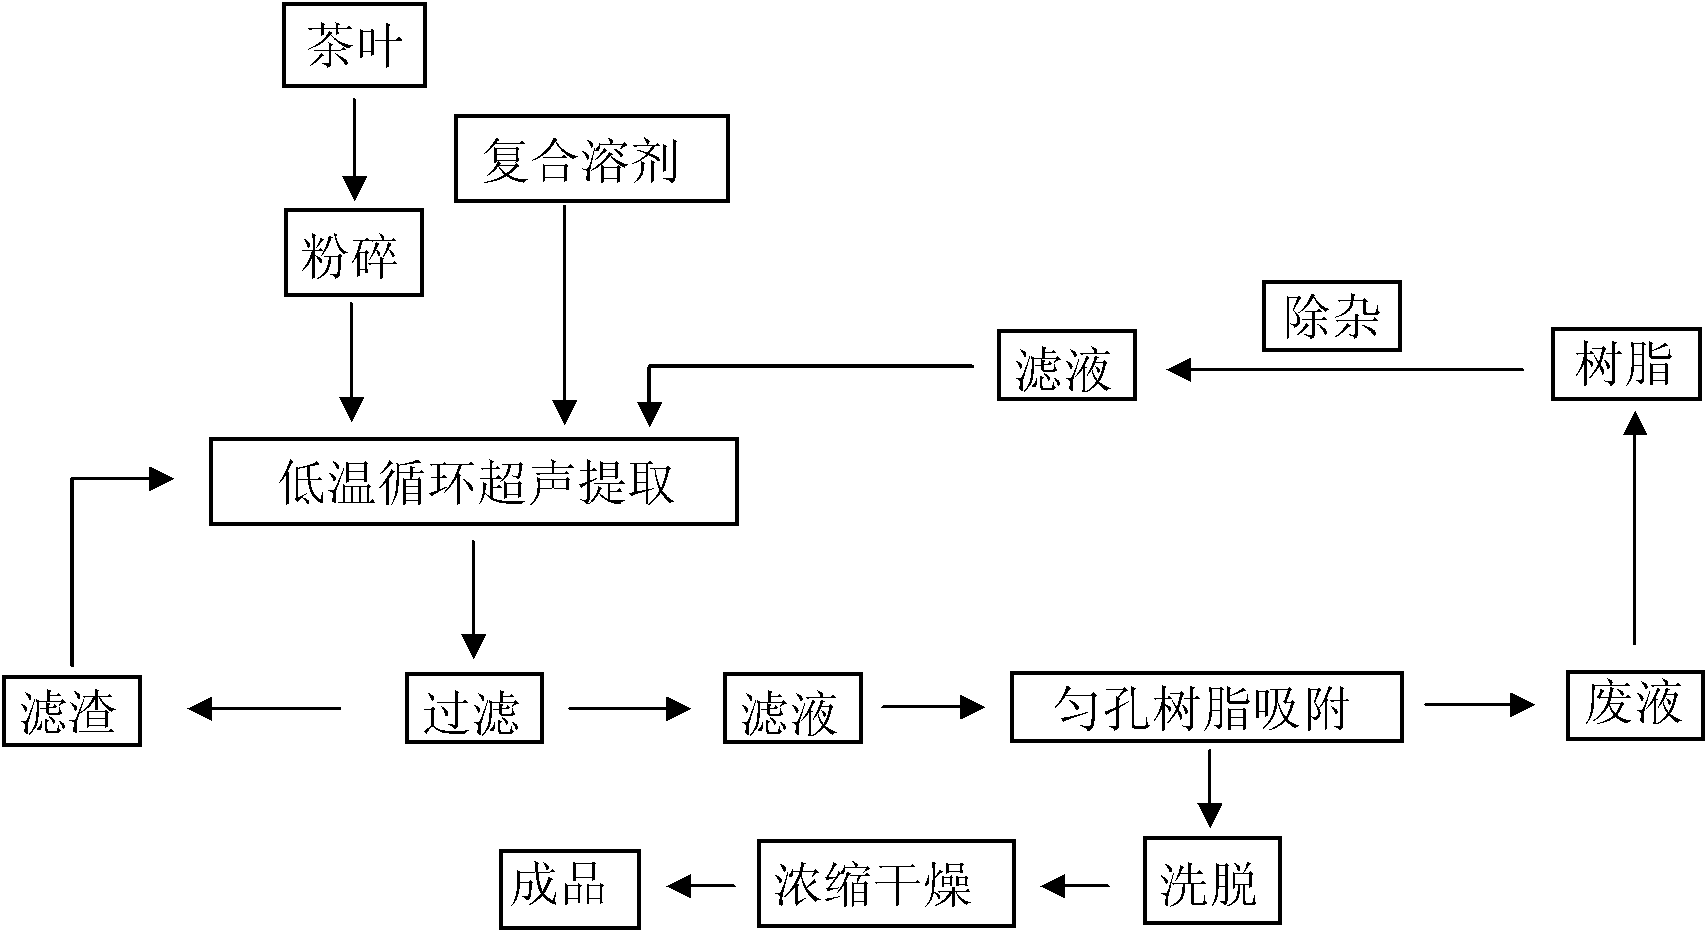 Process for extracting tea polyphenol